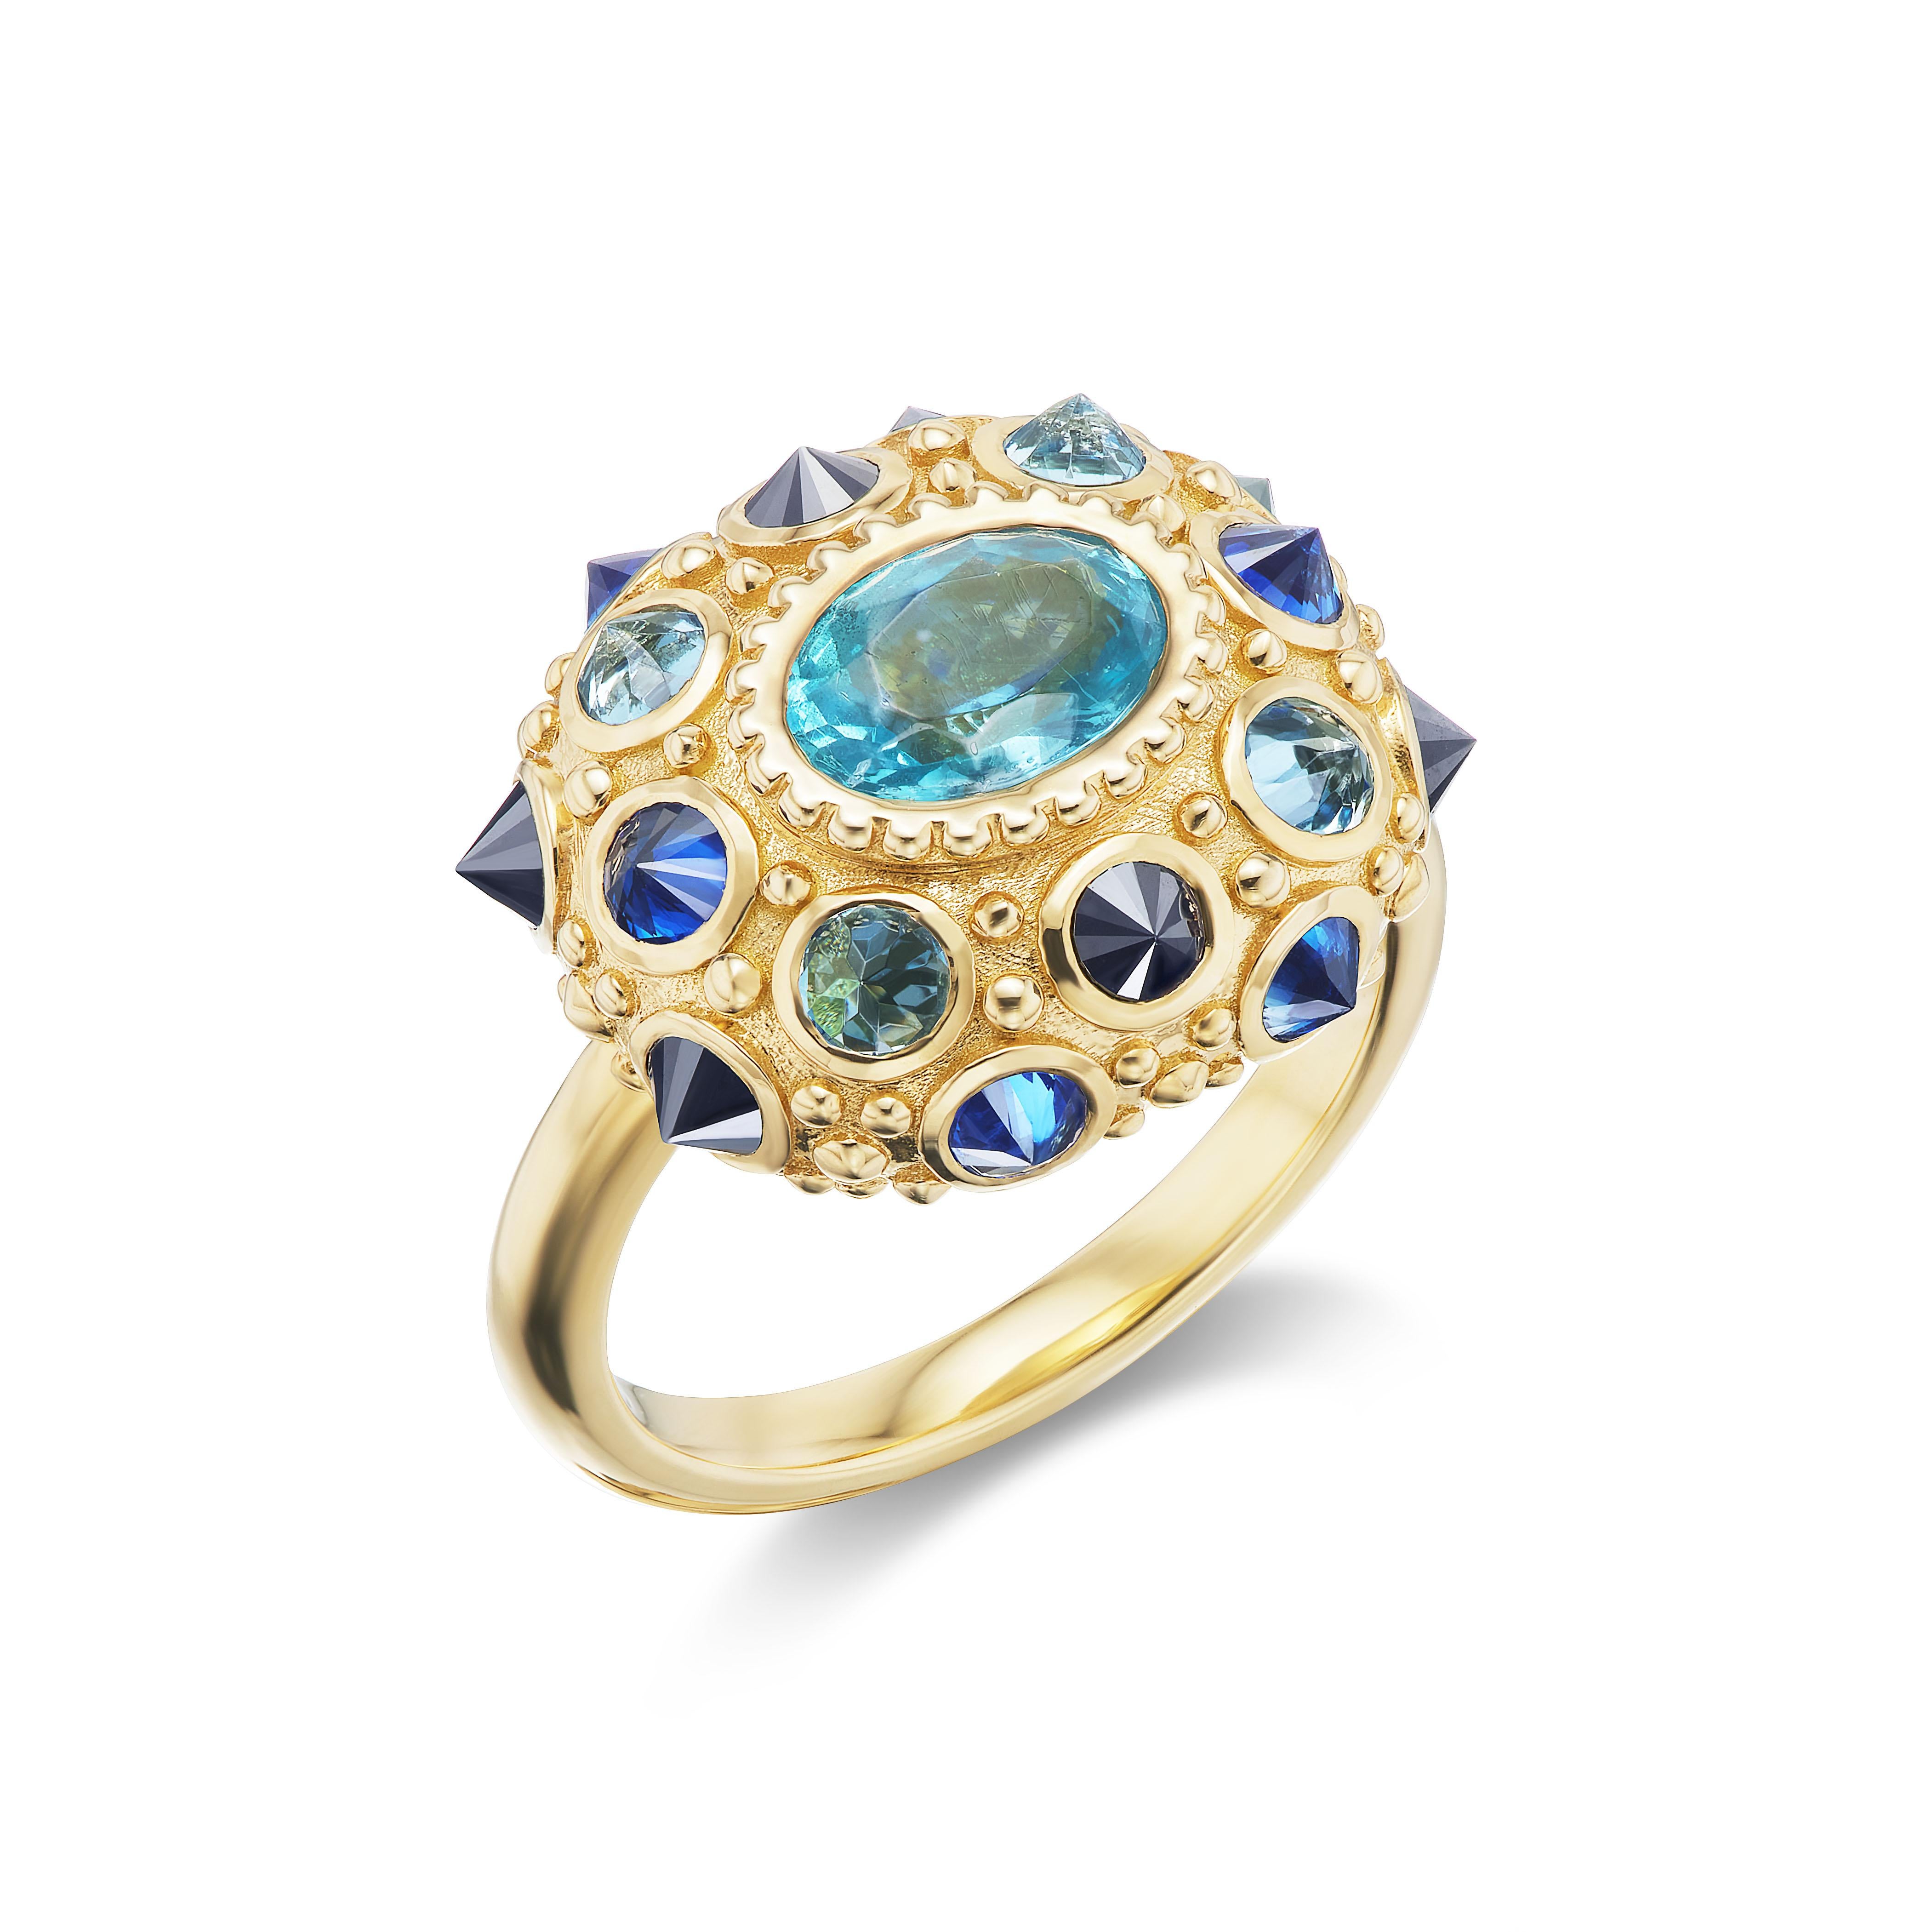 18k Yellow Gold,  1.18ct Apatite, .44ct  Aqua, .73ct Blue Sapphire, and .75ct Black Diamond 

Design Inspiration

The Funny Valentine rings all gems have meanings passed down for centuries. A 'Twinkle in the Twilight' ring invokes the power of